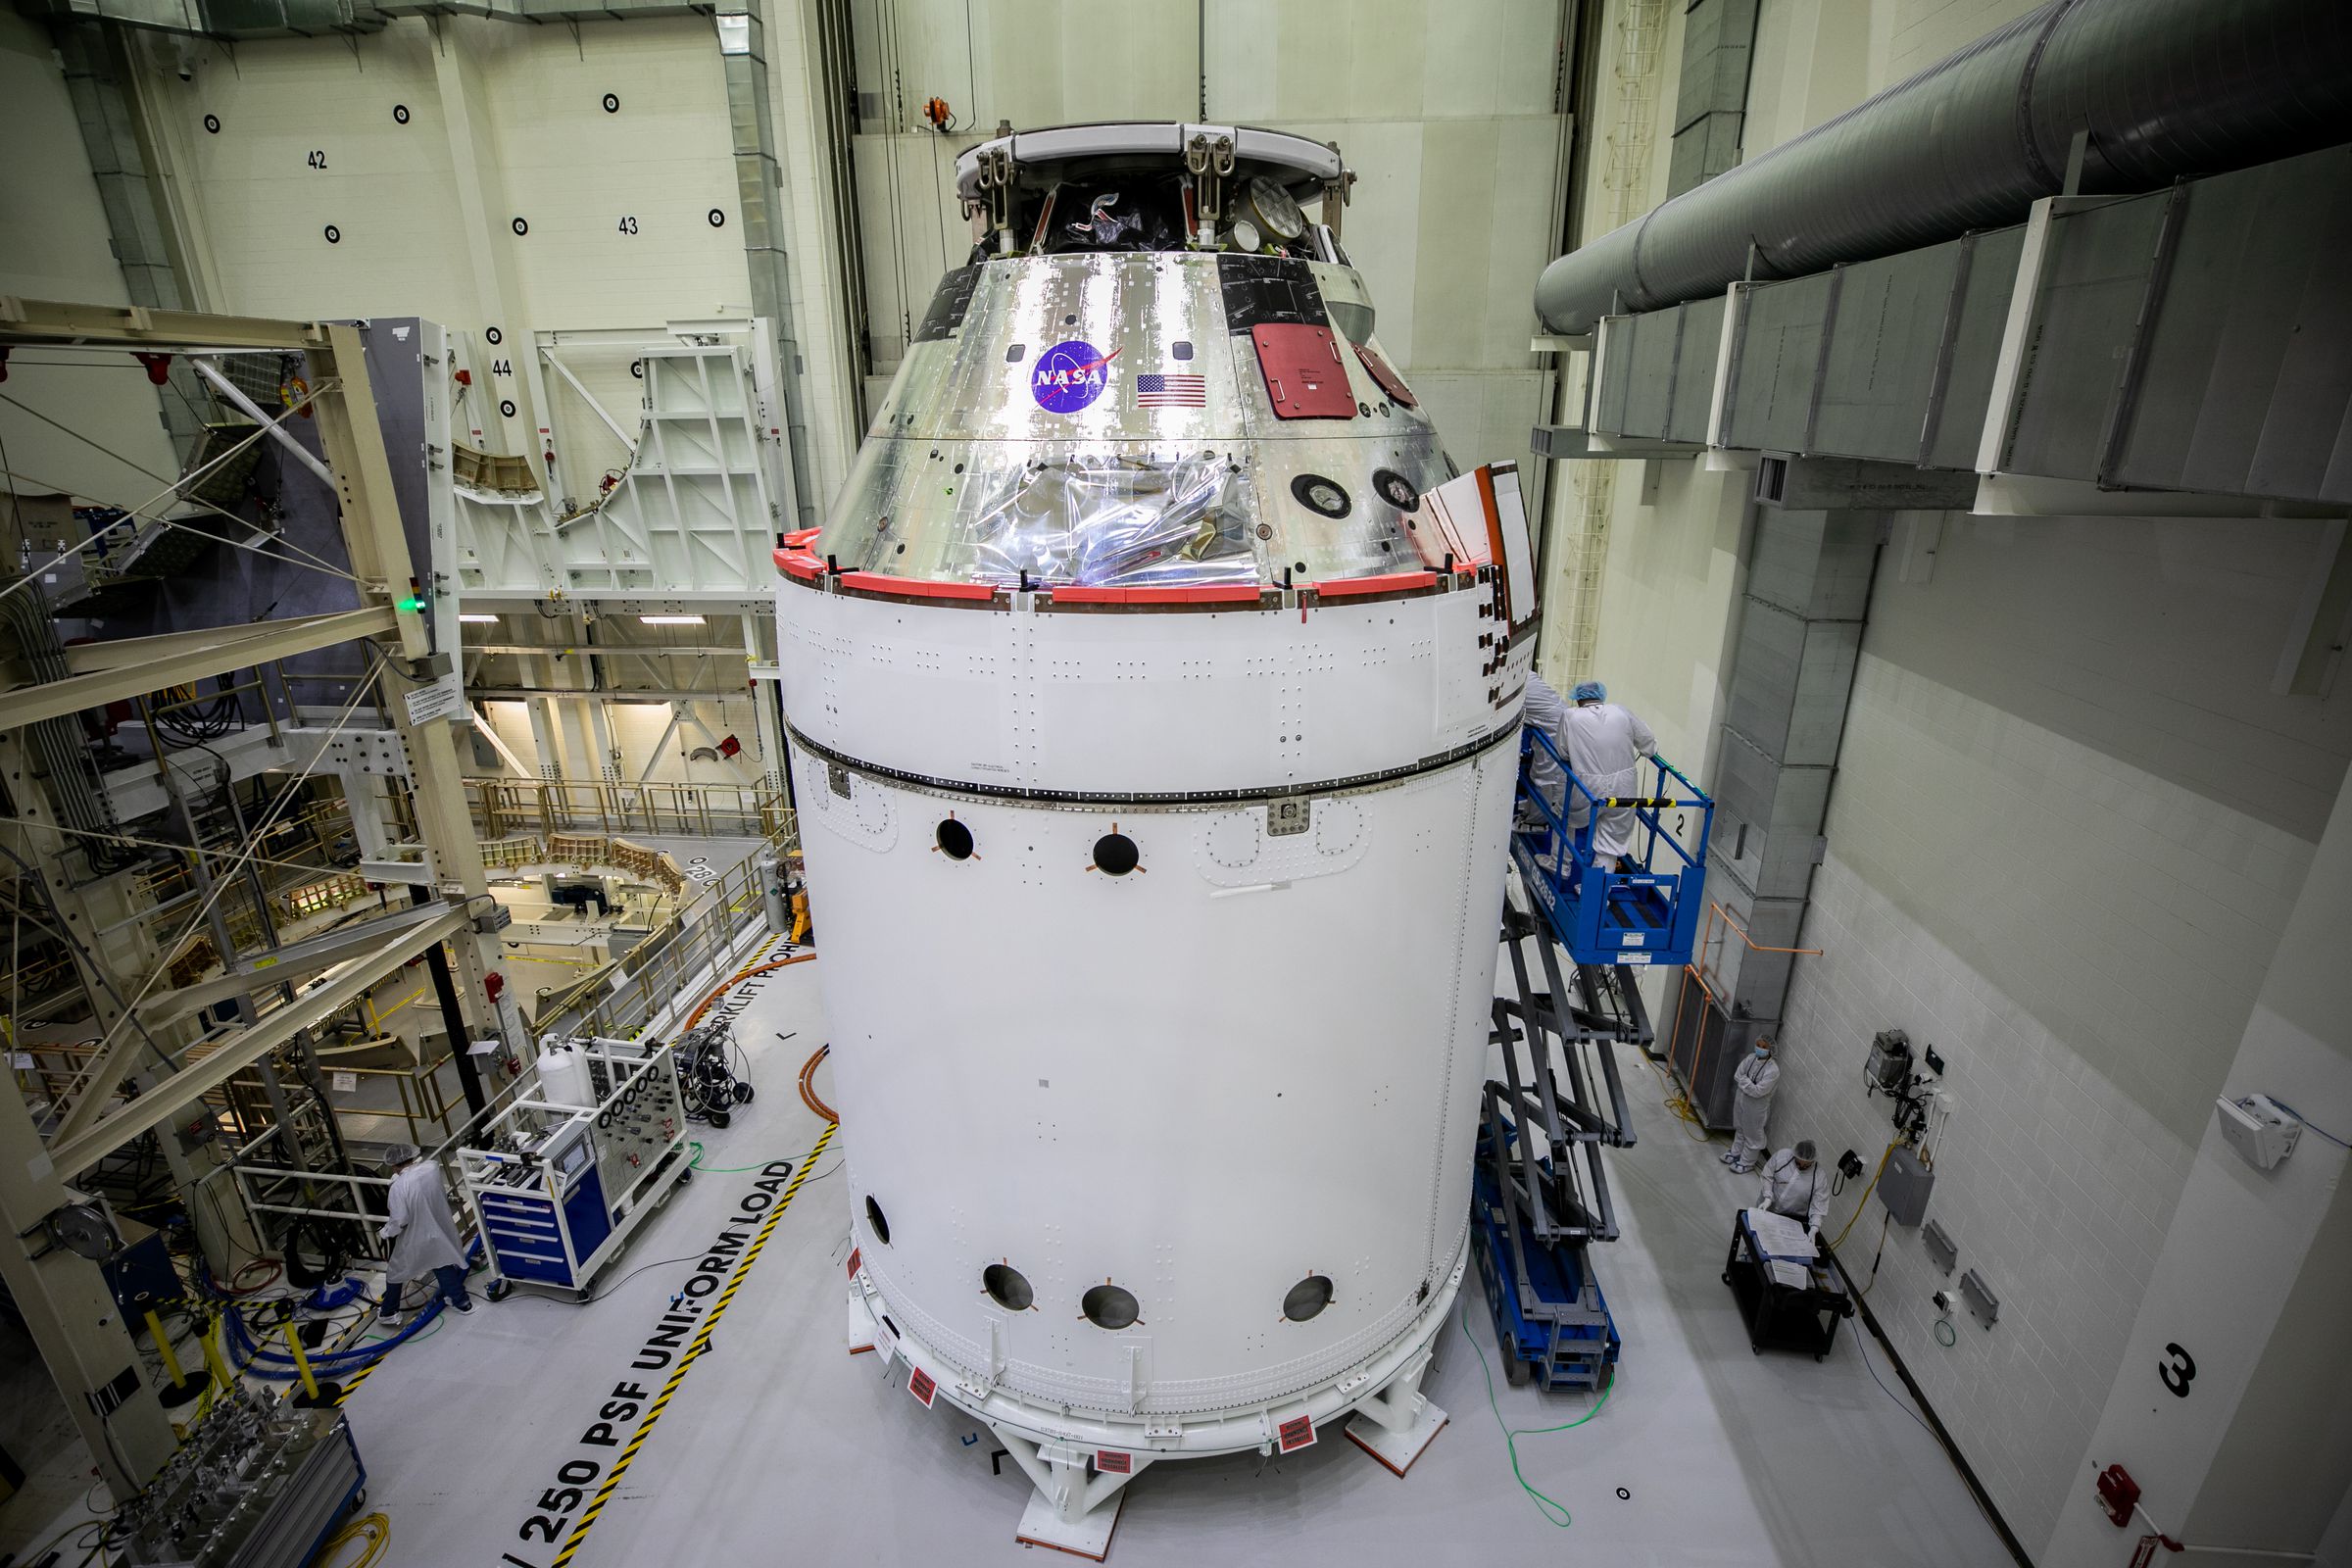 NASA’s Orion capsule attached to its adapter and service module.